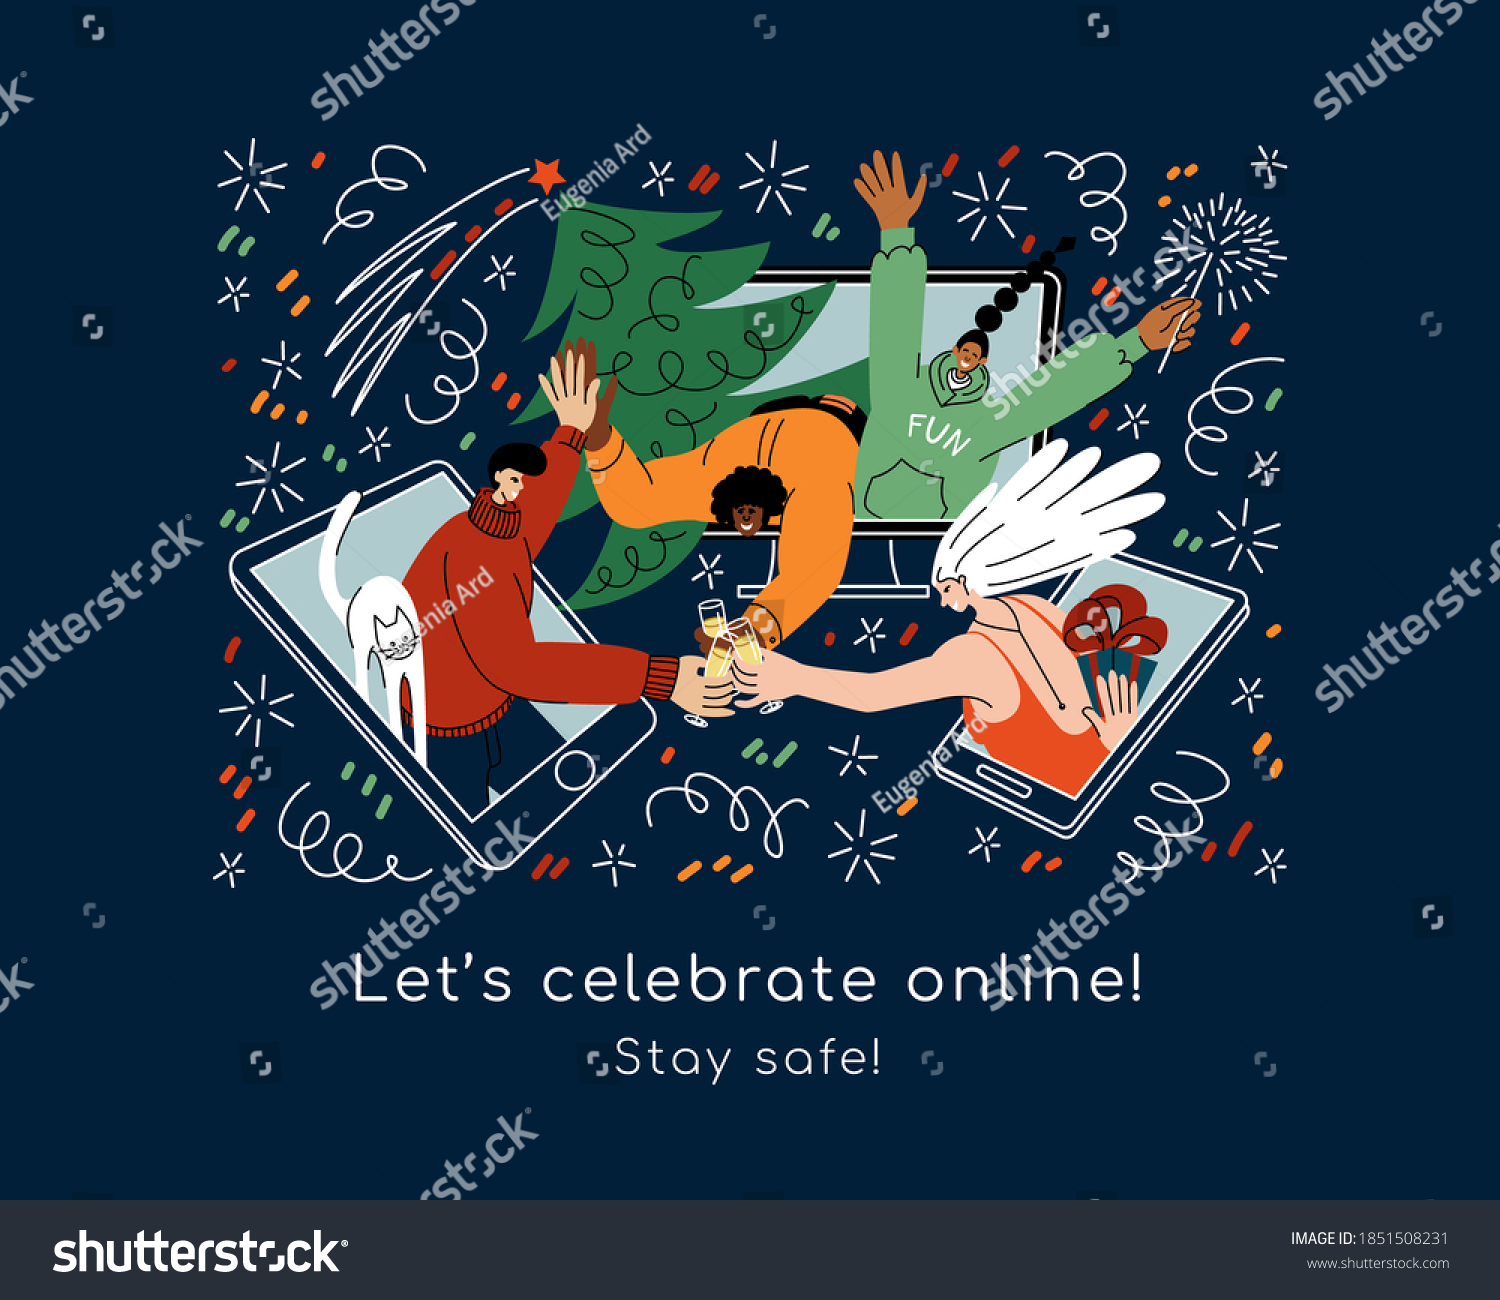 Young people of different races celebrate Christmas and New year online. Friends meeting via internet using phone, tablet, desktop; celebrating holidays together, drinking champagne, exchanging gifts #1851508231